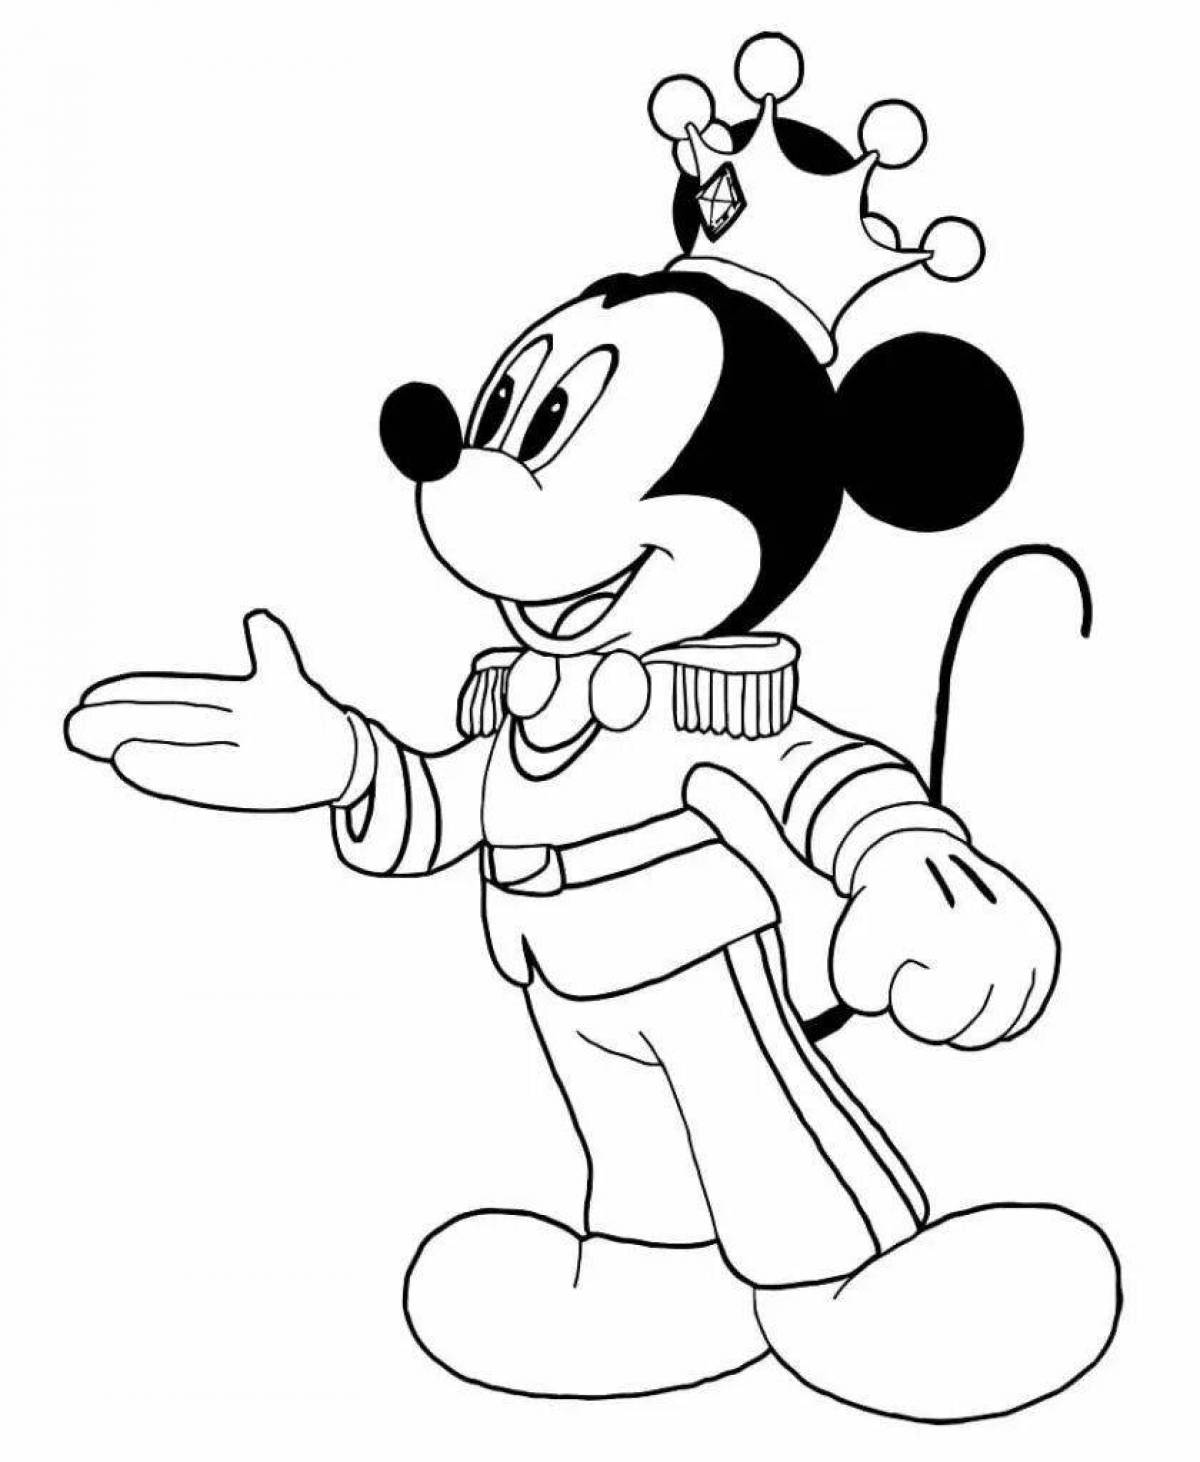 Mickey's funny coloring book